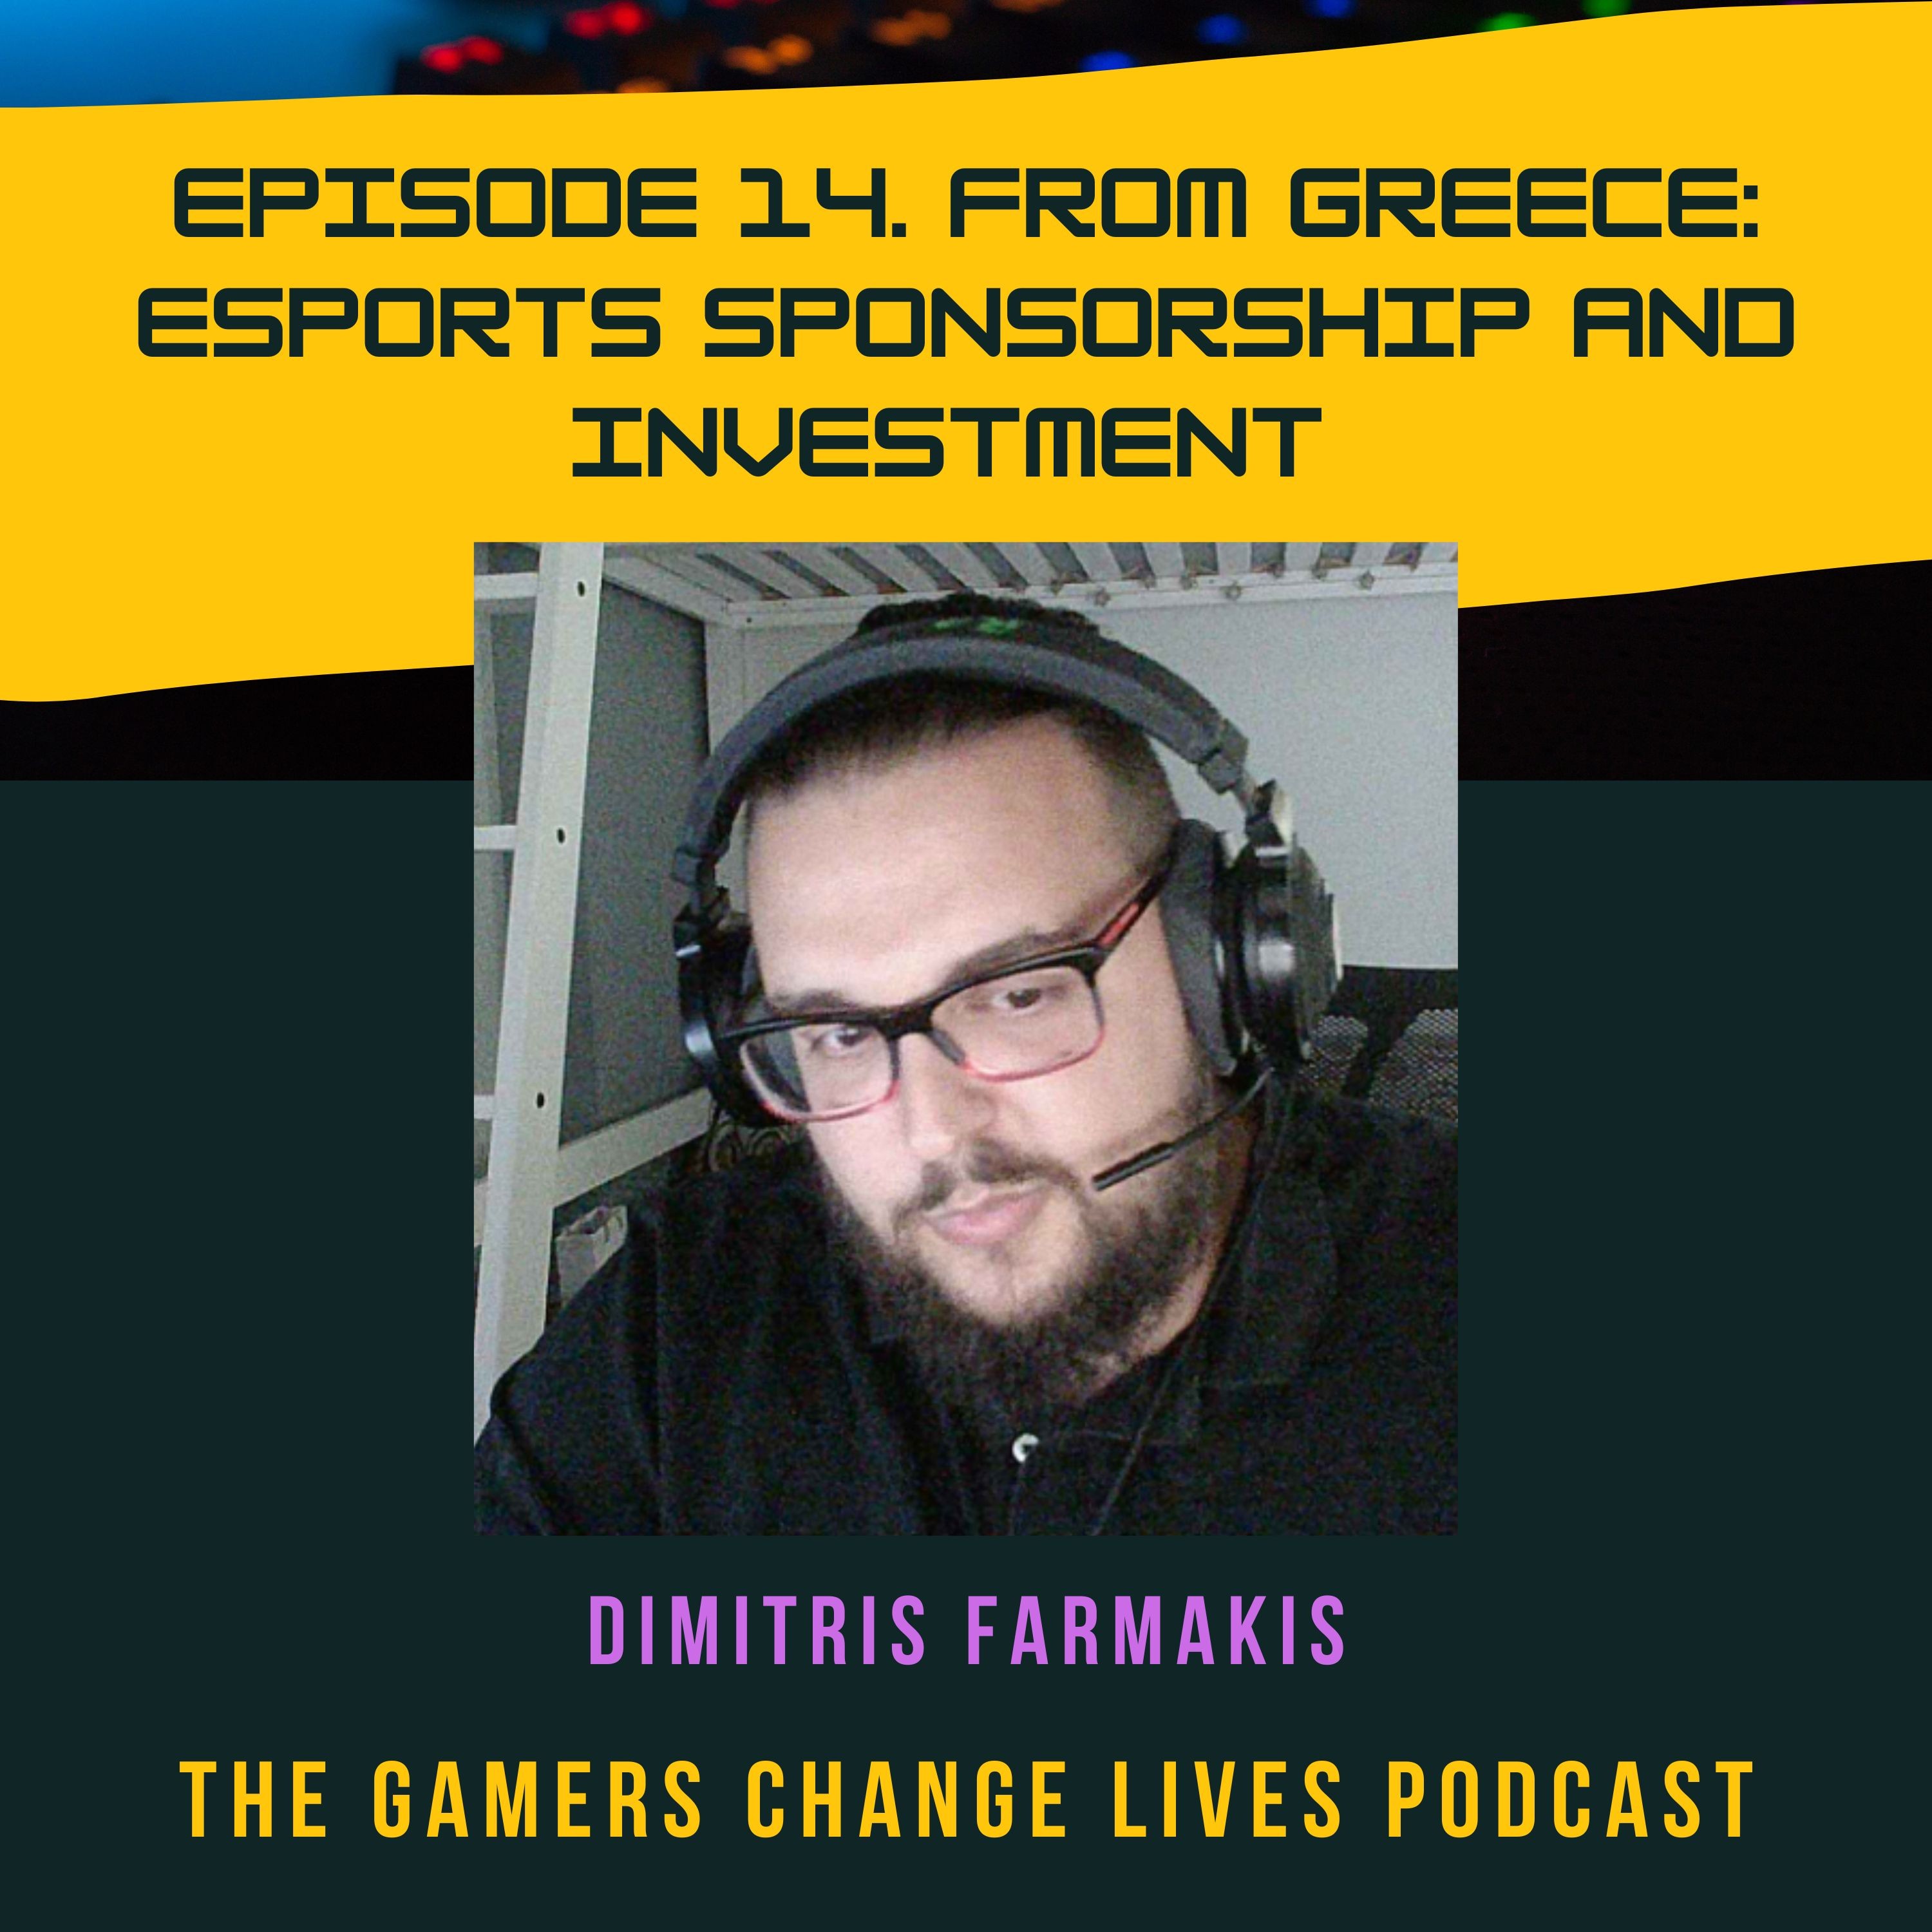 Esports Sponsorship and Investment with Dimitris Farmakis from Greece Image